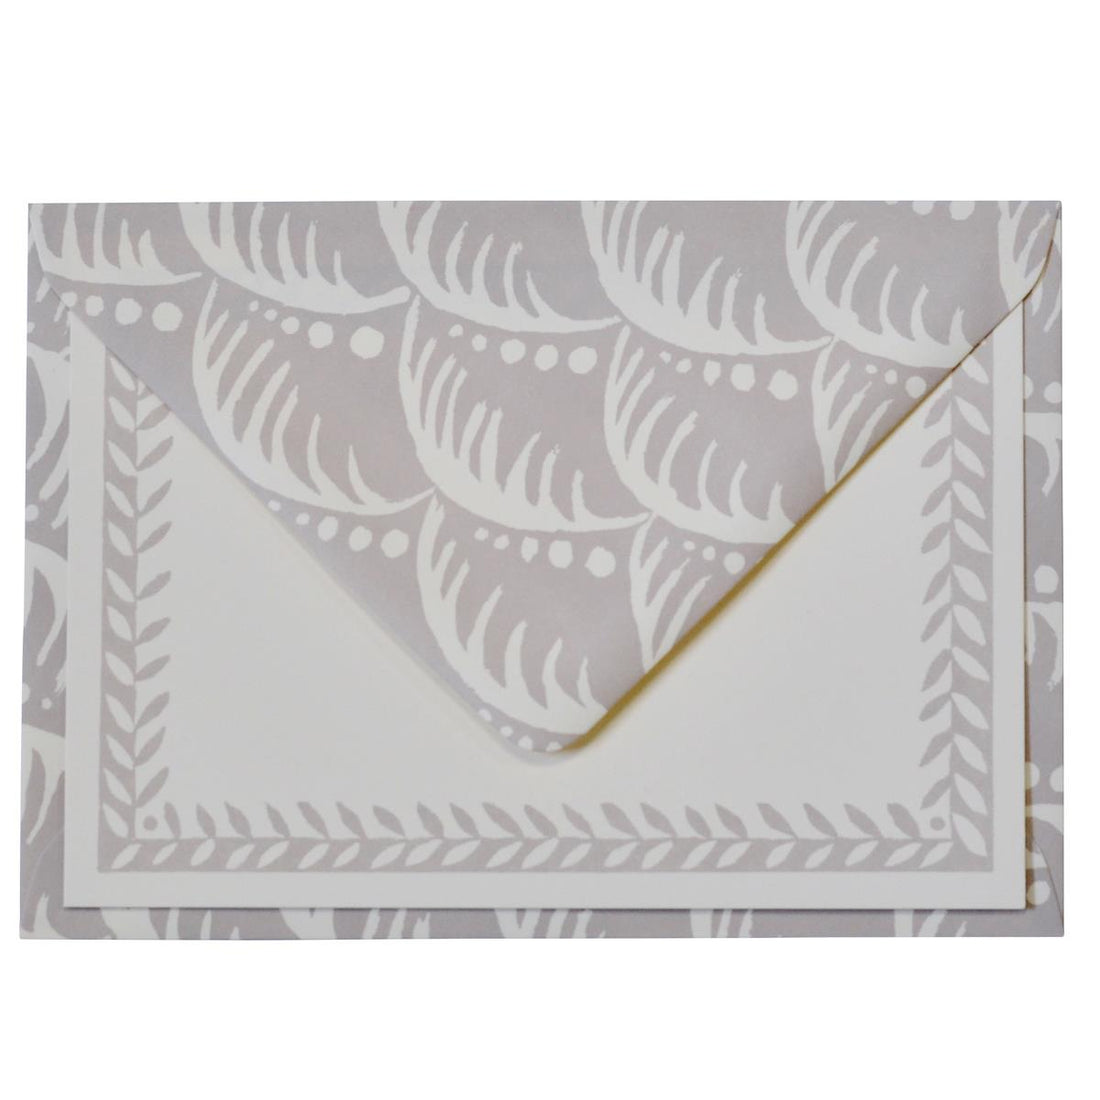 10 POSTCARDS WITH PATTERNED BORDER | PEARL GREY